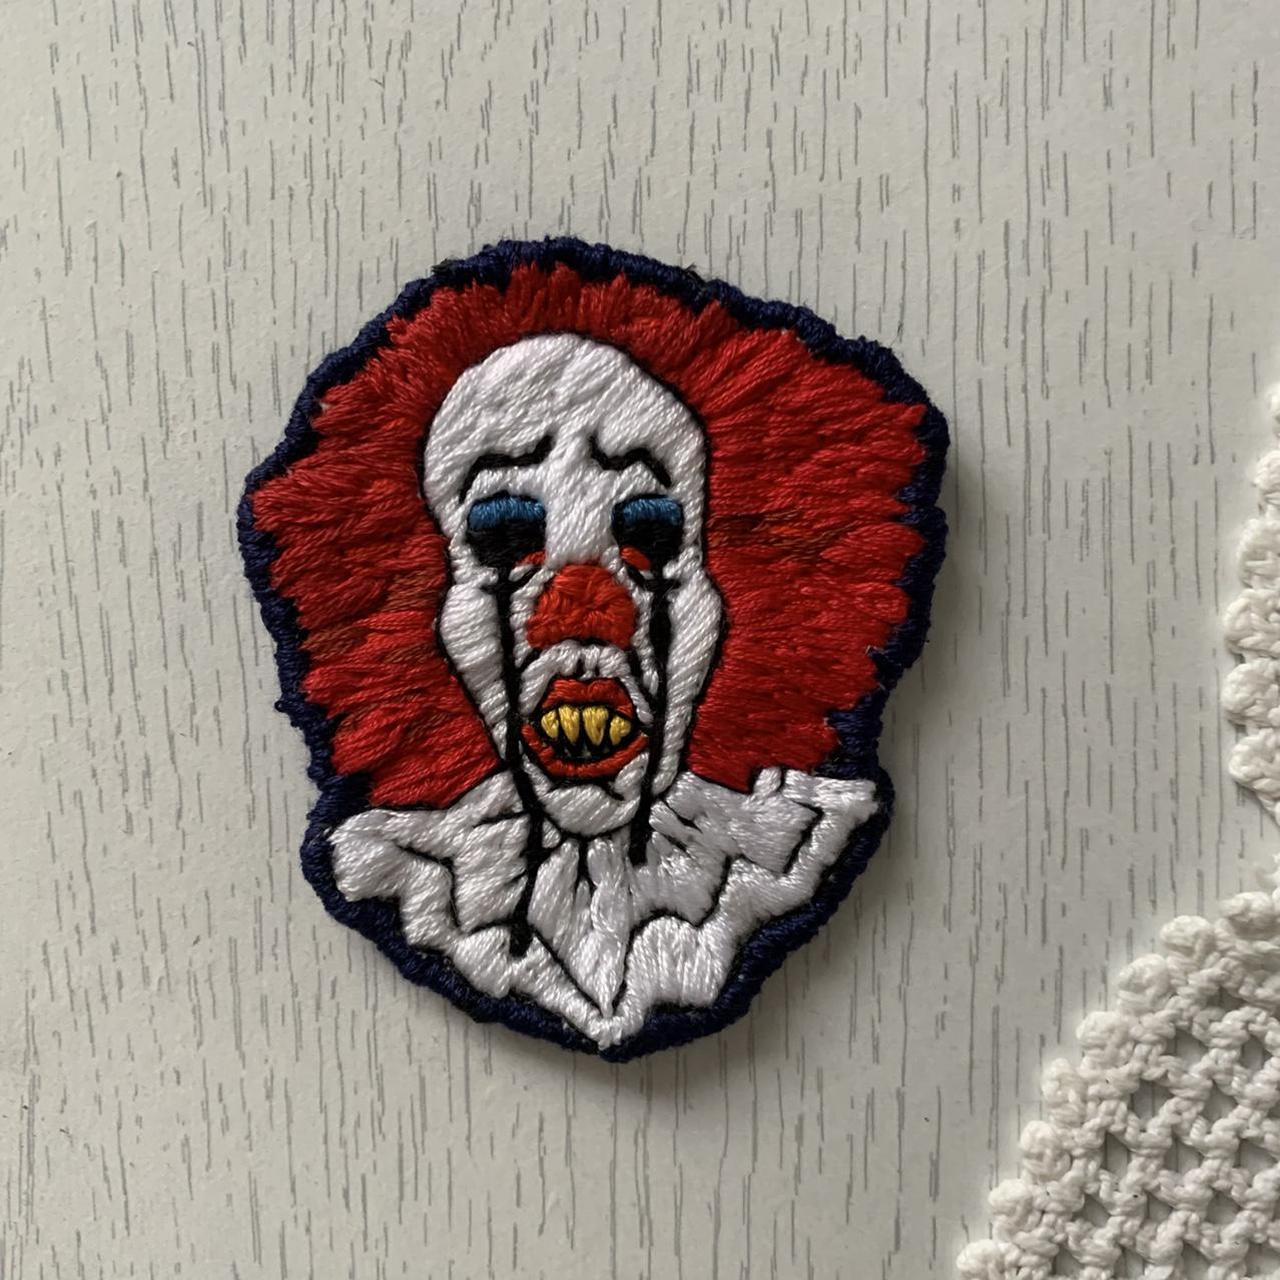 1Pennywise embroidery patch 